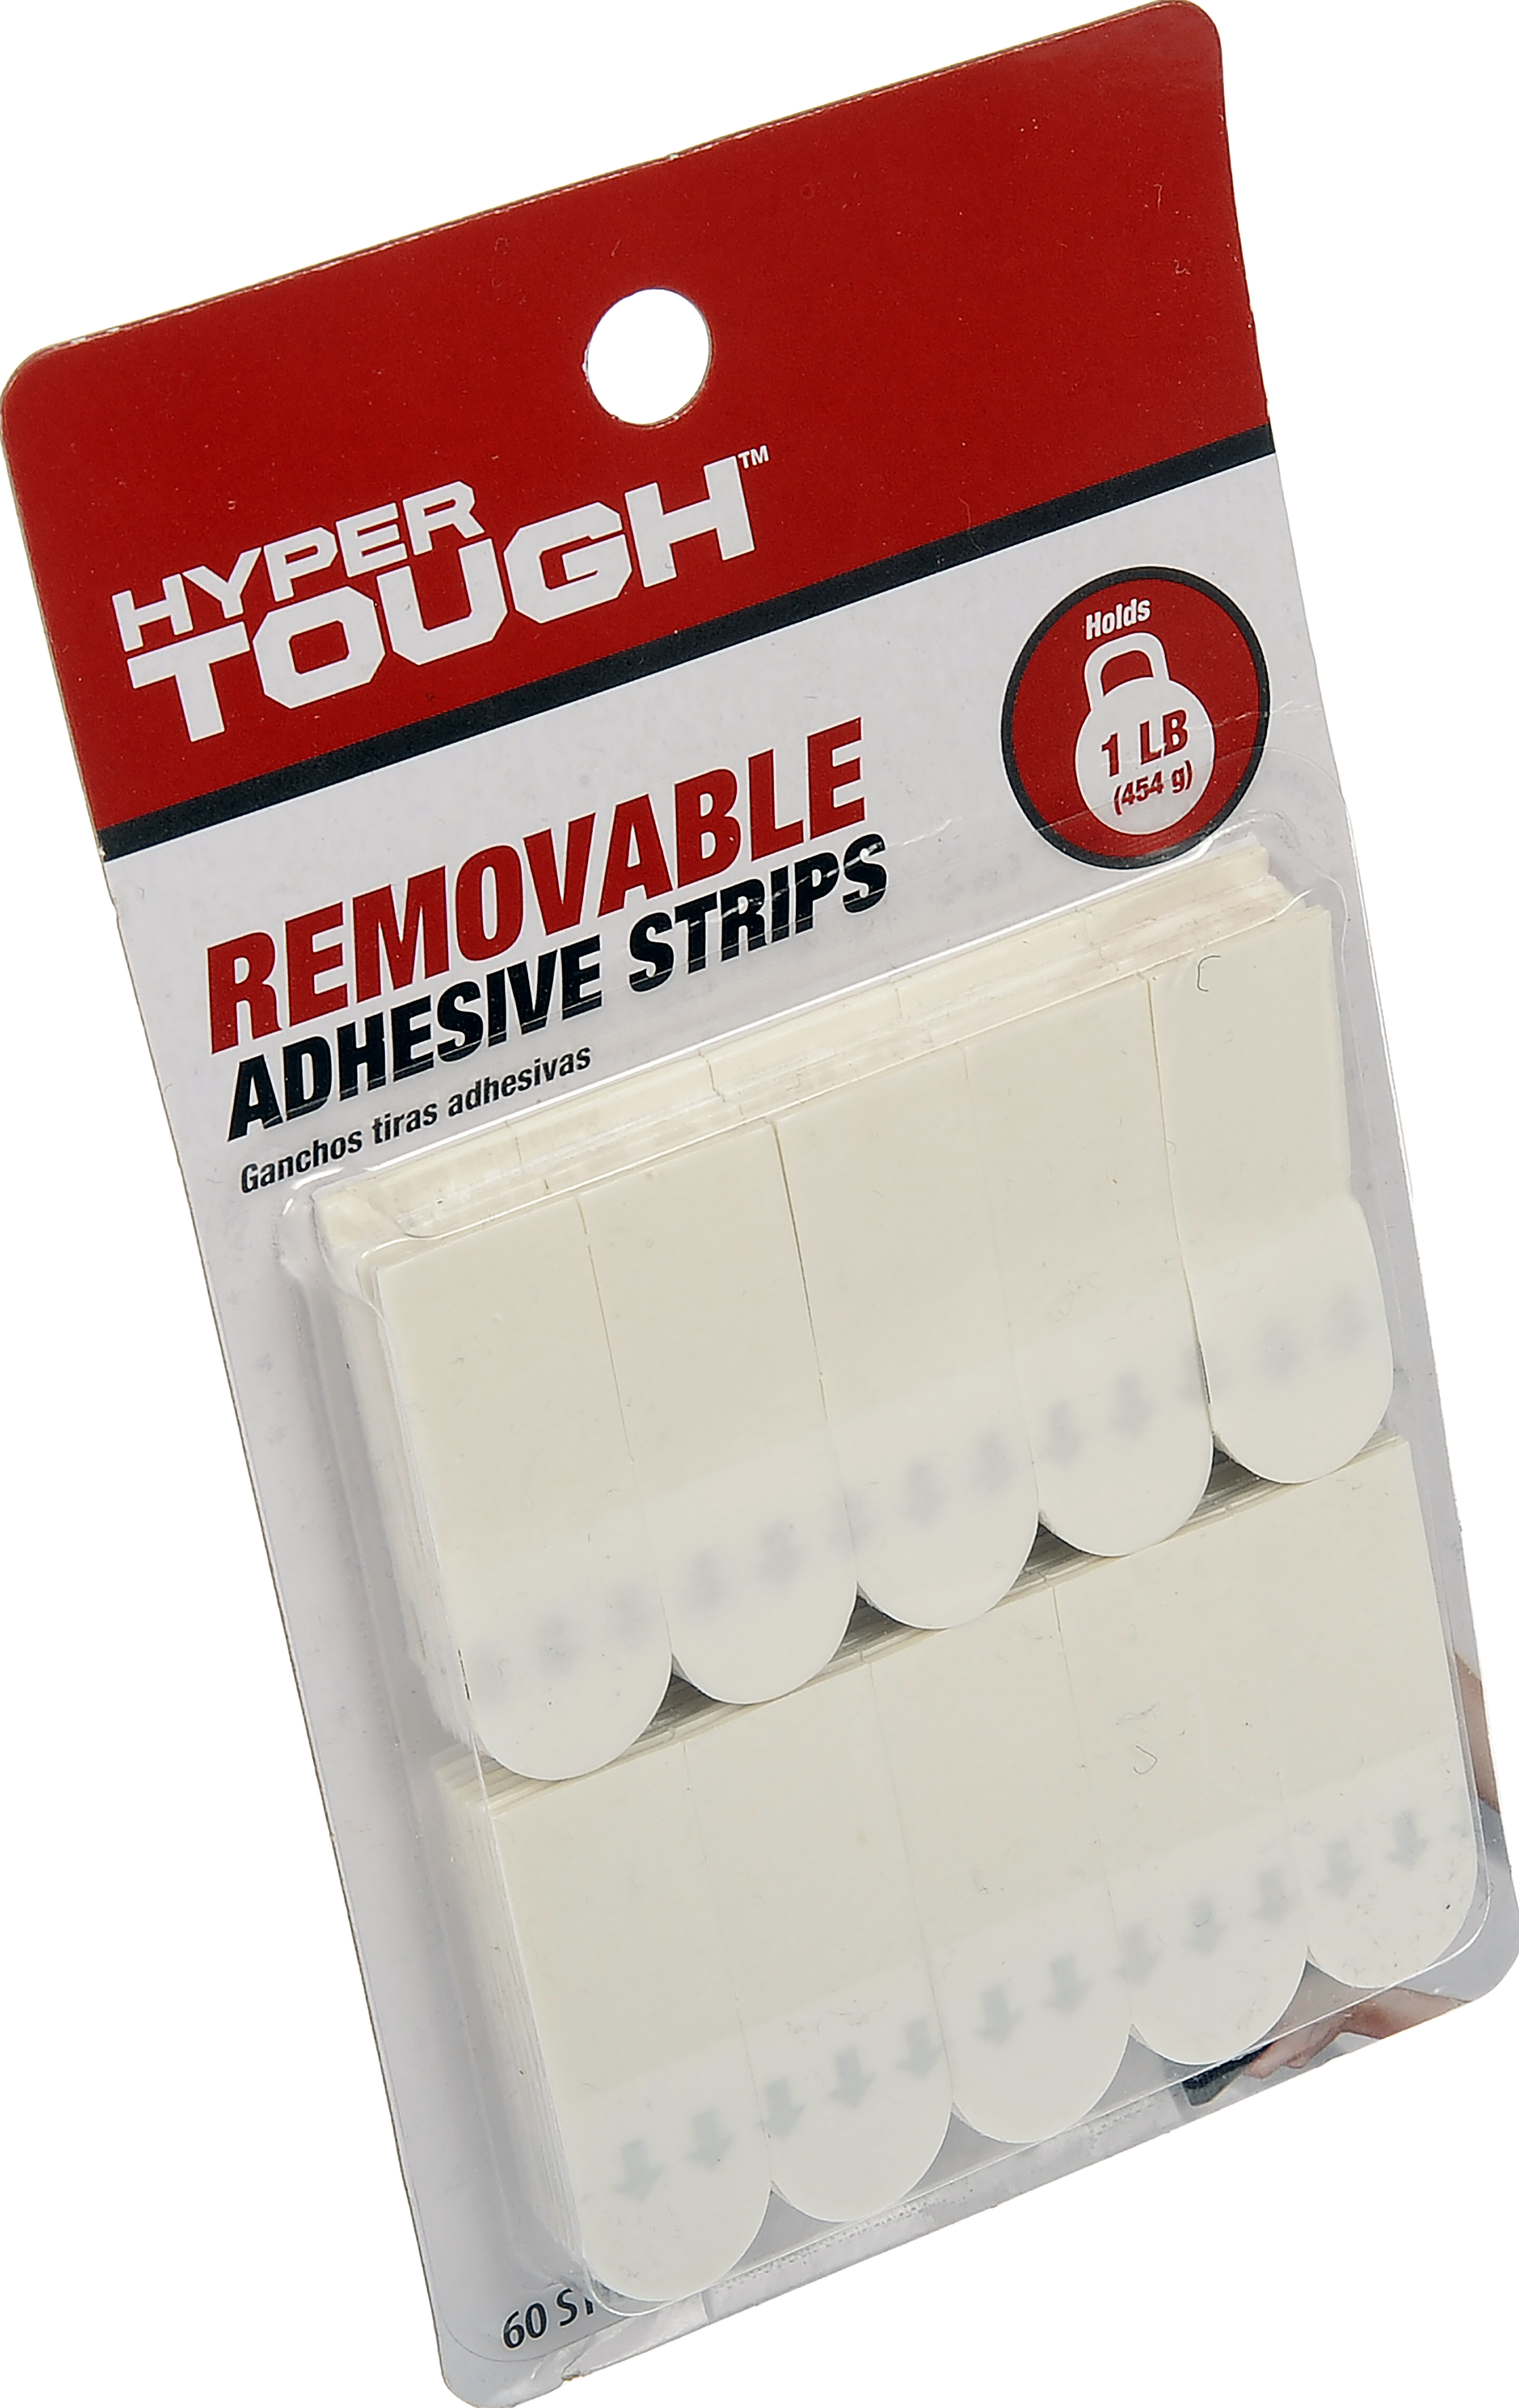 Hypertough Holds Up to 1lb 60 Strips Removable Adhesive Strips